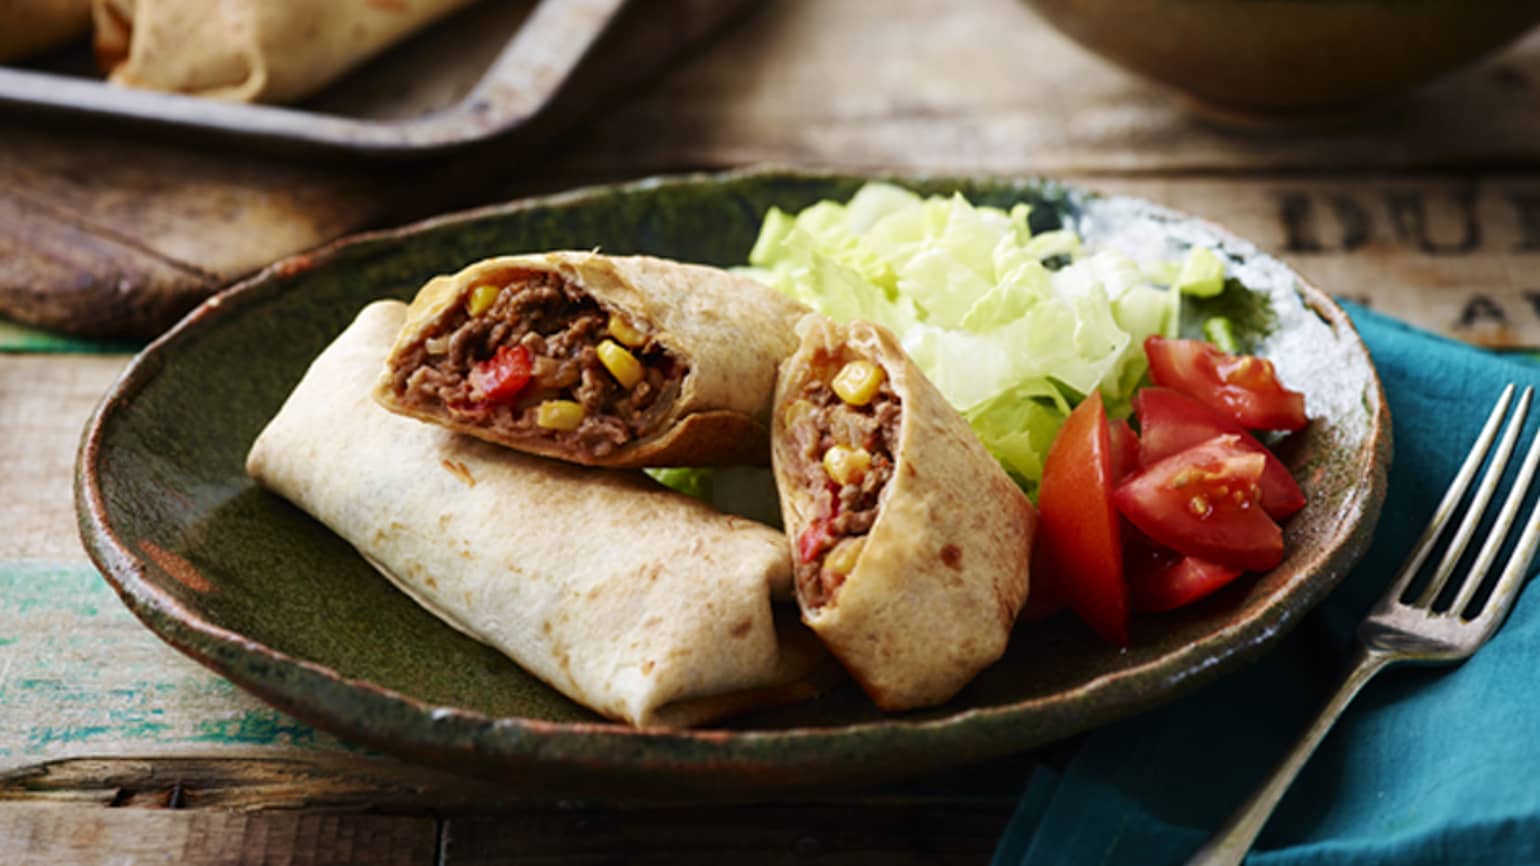 Ground Beef Chimichangas Recipe - Mexican.